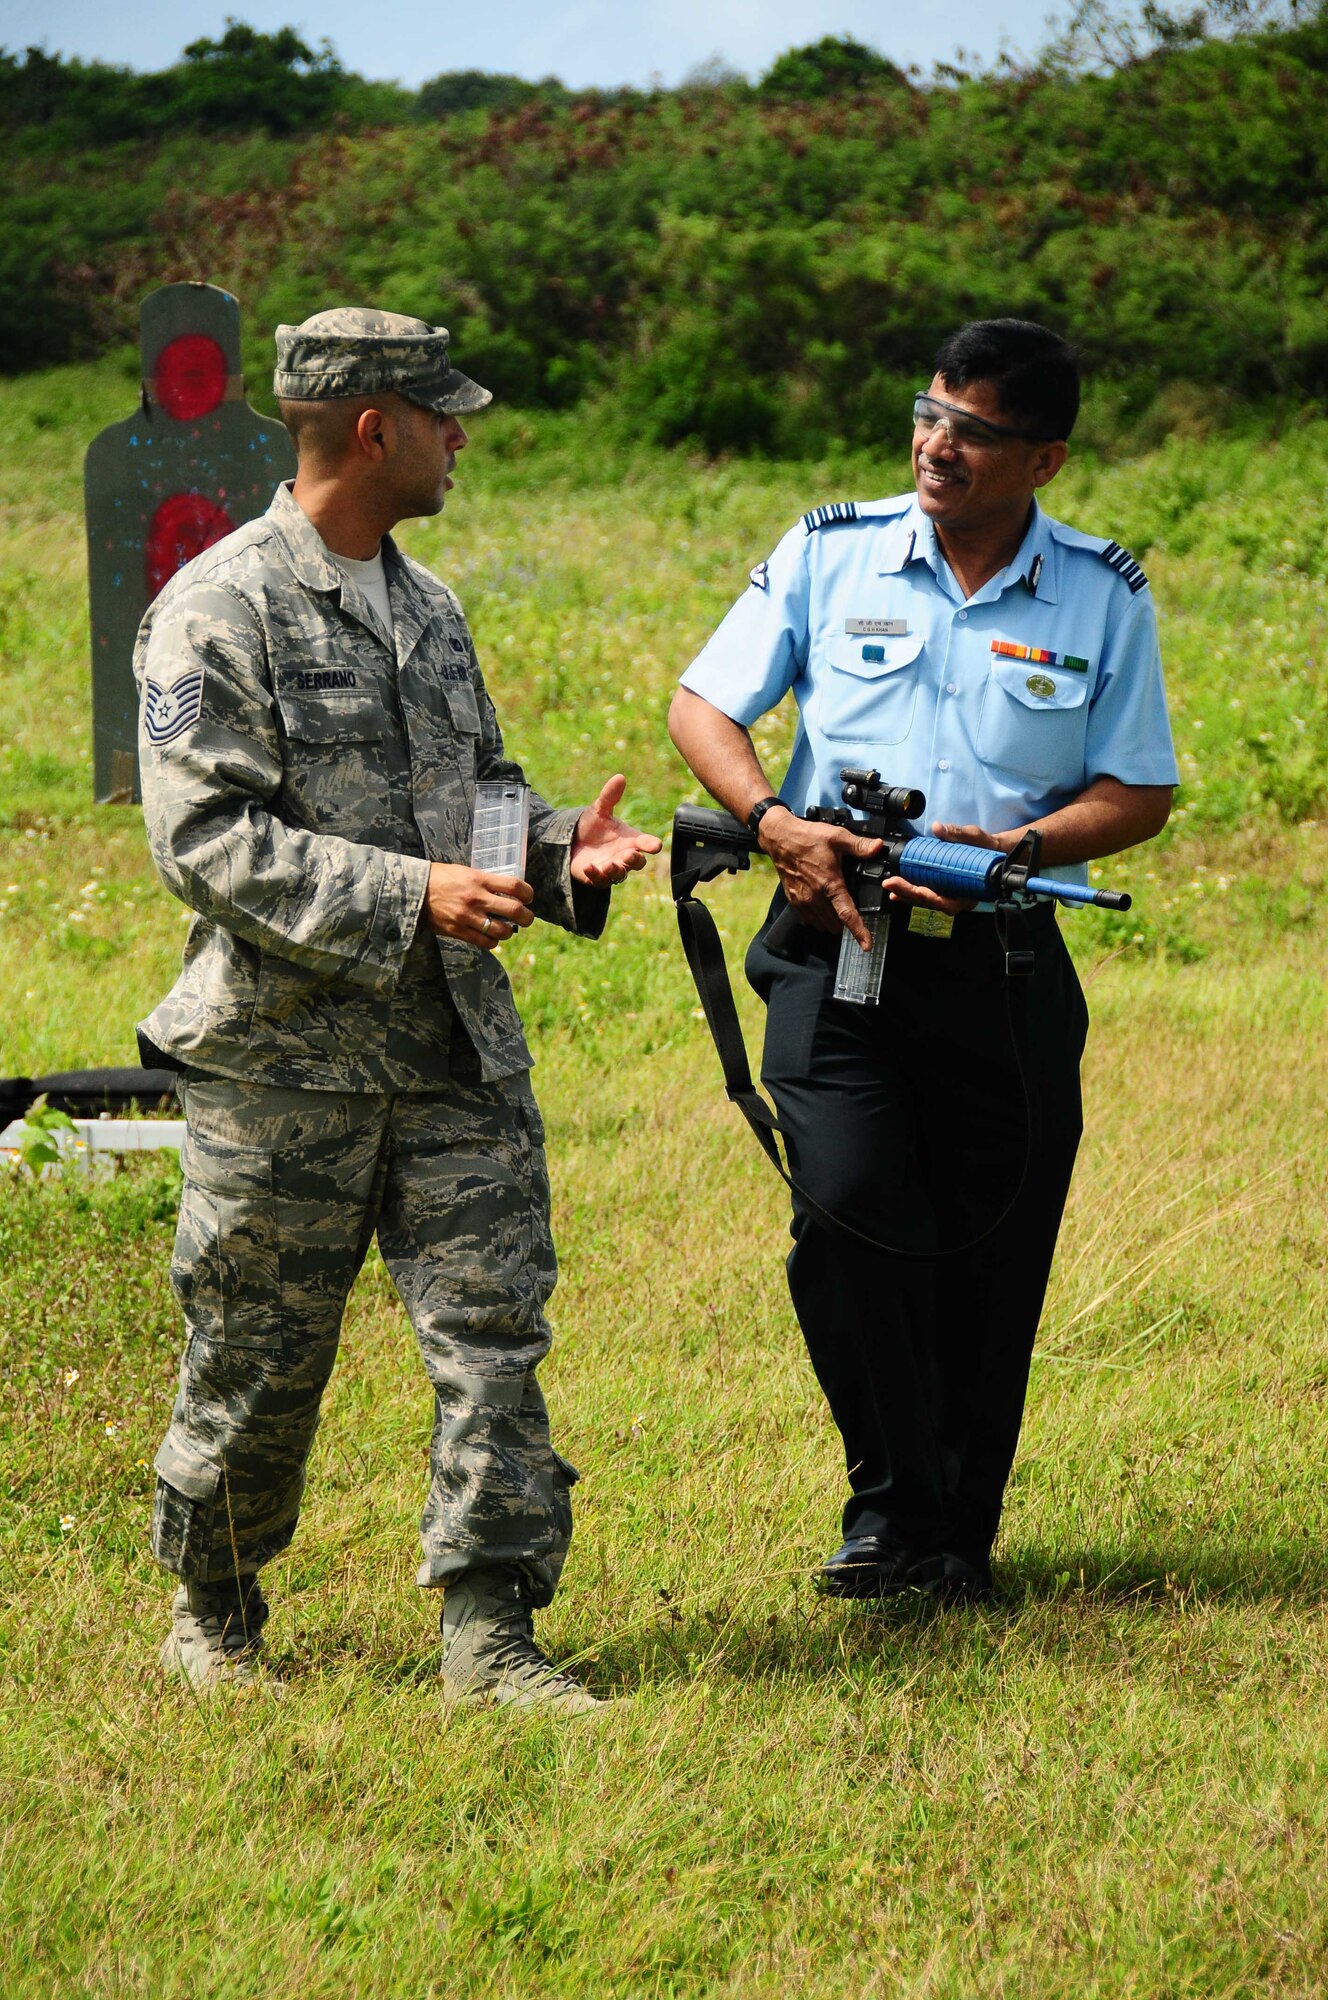 ANDERSEN AIR FORCE BASE, Guam ? Tech. Sgt. Marcus Serrano from the 736th Security Forces discusses small arms firing technique with a visitor from India as part of the Subject Matter Expert Exercise, here on March 24. Papa New Guinea, Mongolia, India, and the Philippines were among the nations represented to exchange ideas on security matters pertaining to air base defense. (U.S. Air Force photo by A1C Jeffrey Schultze)